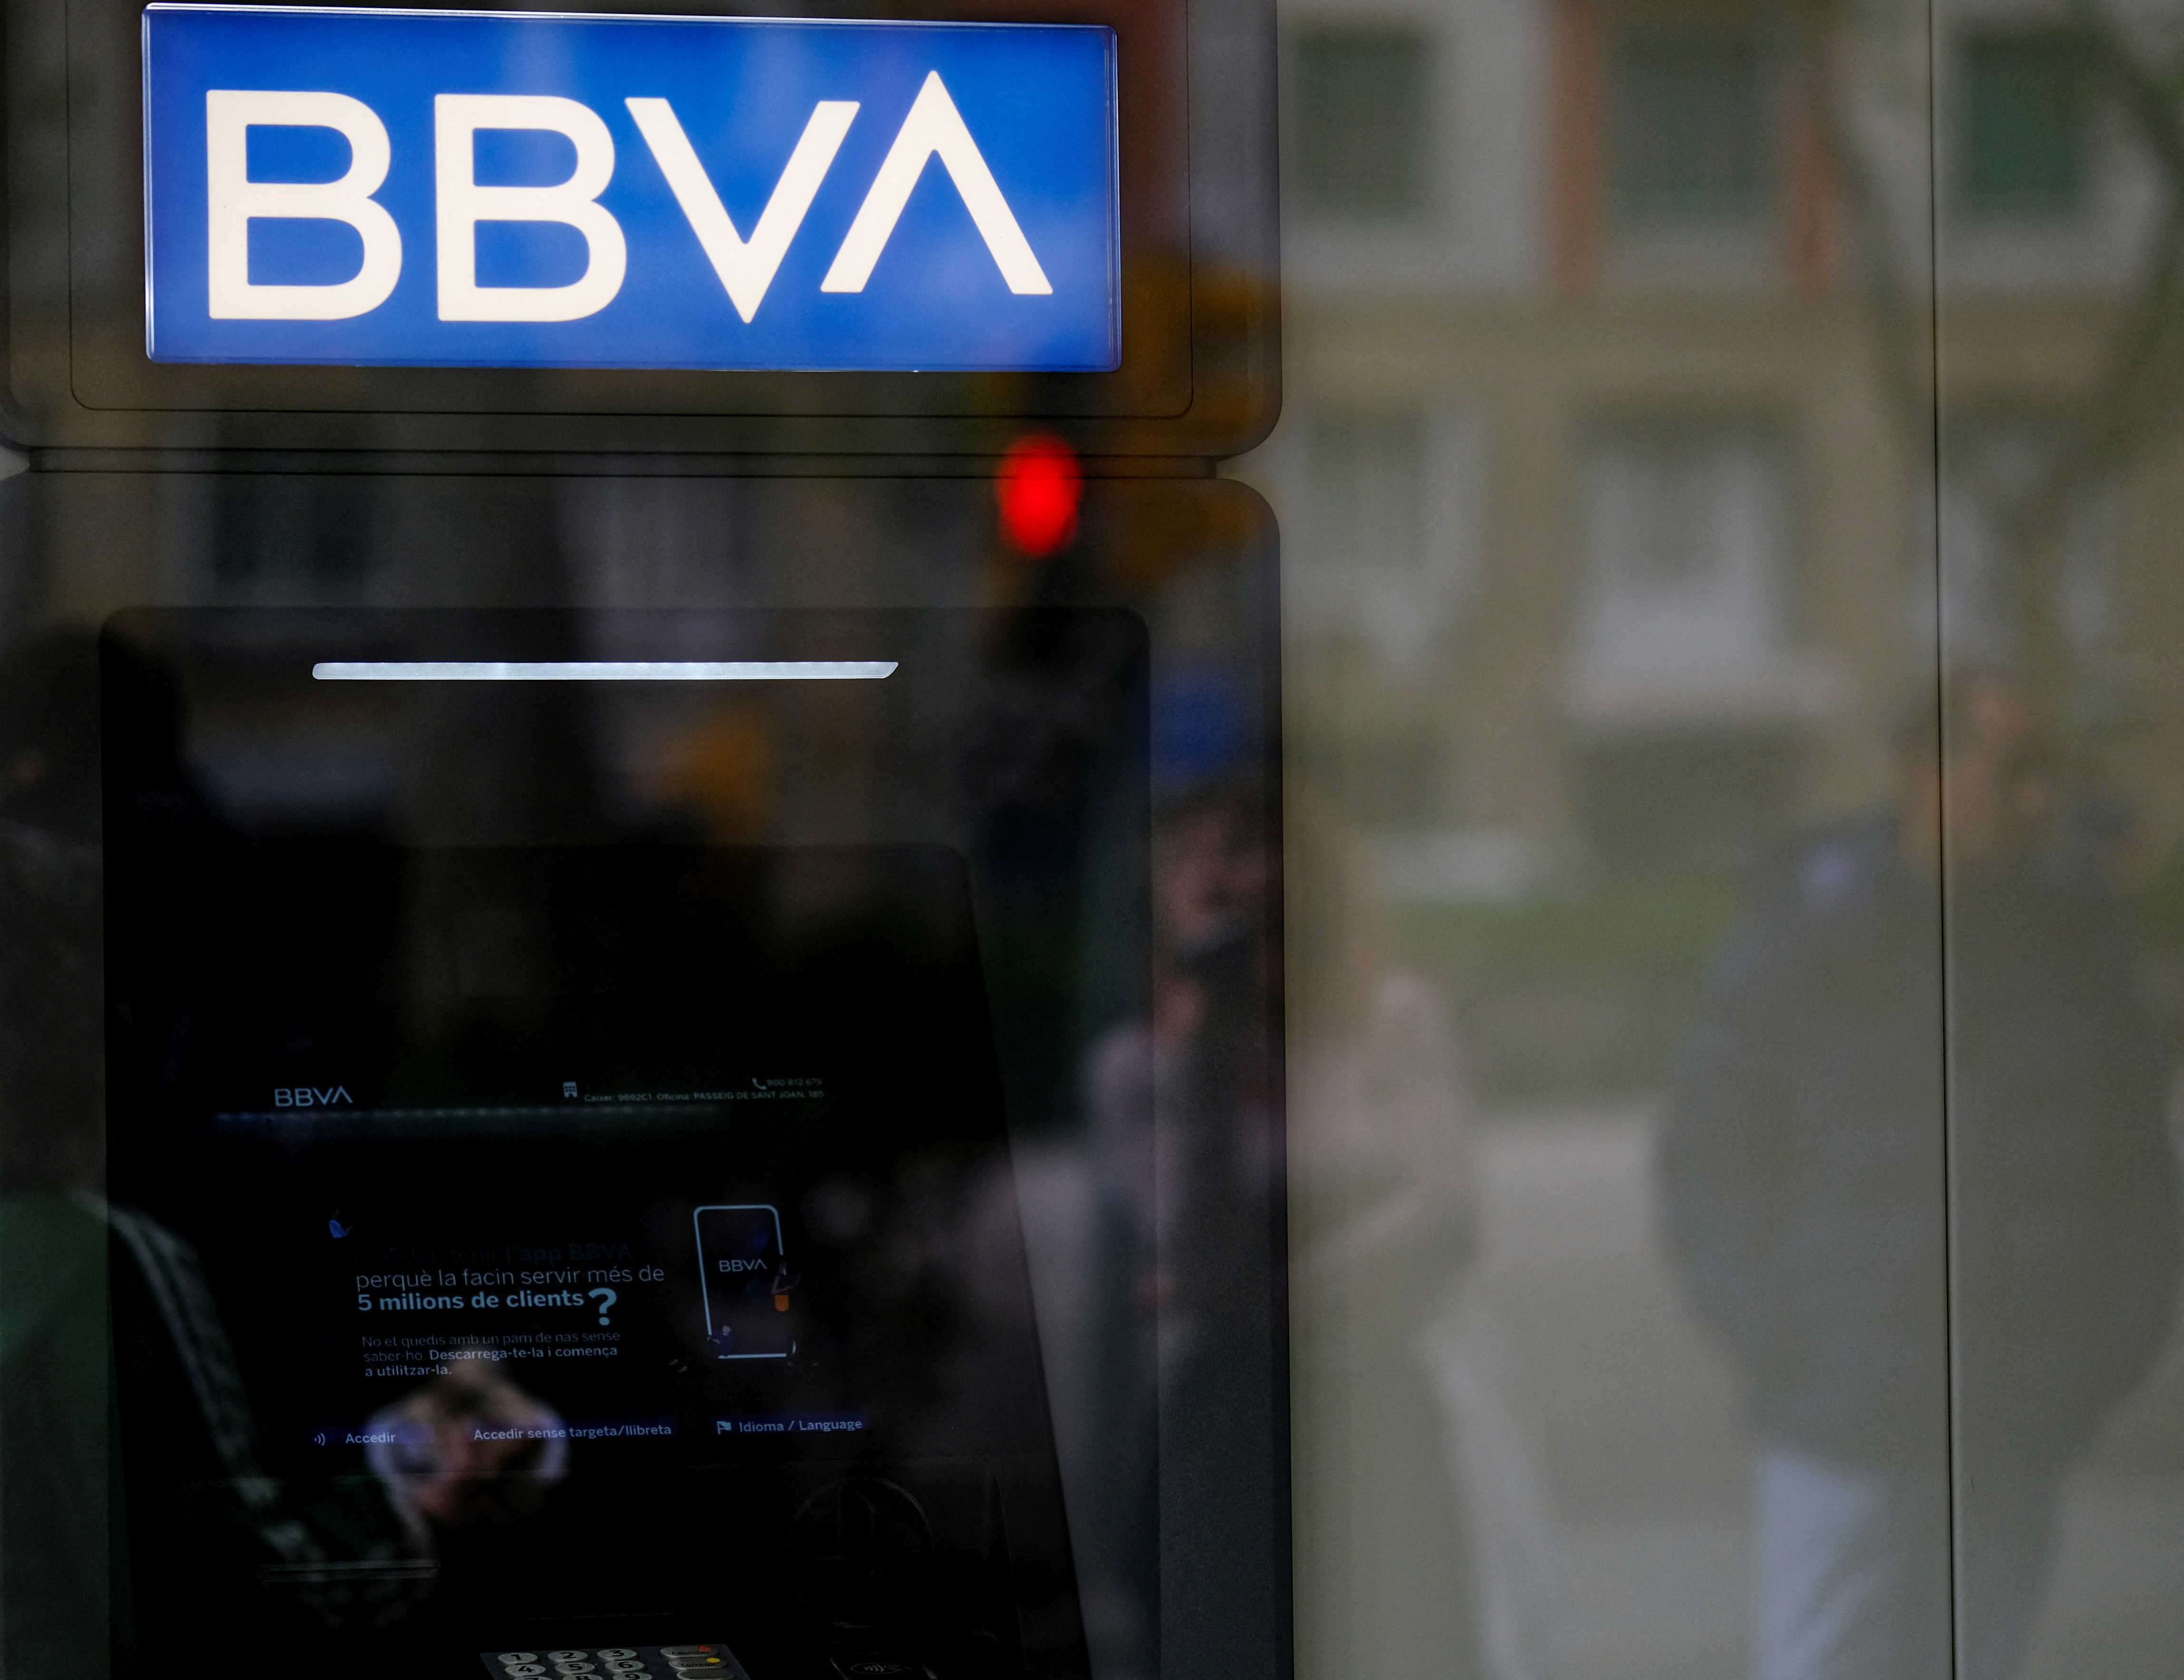 An ATM machine is seen at a BBVA bank branch office, in Barcelona